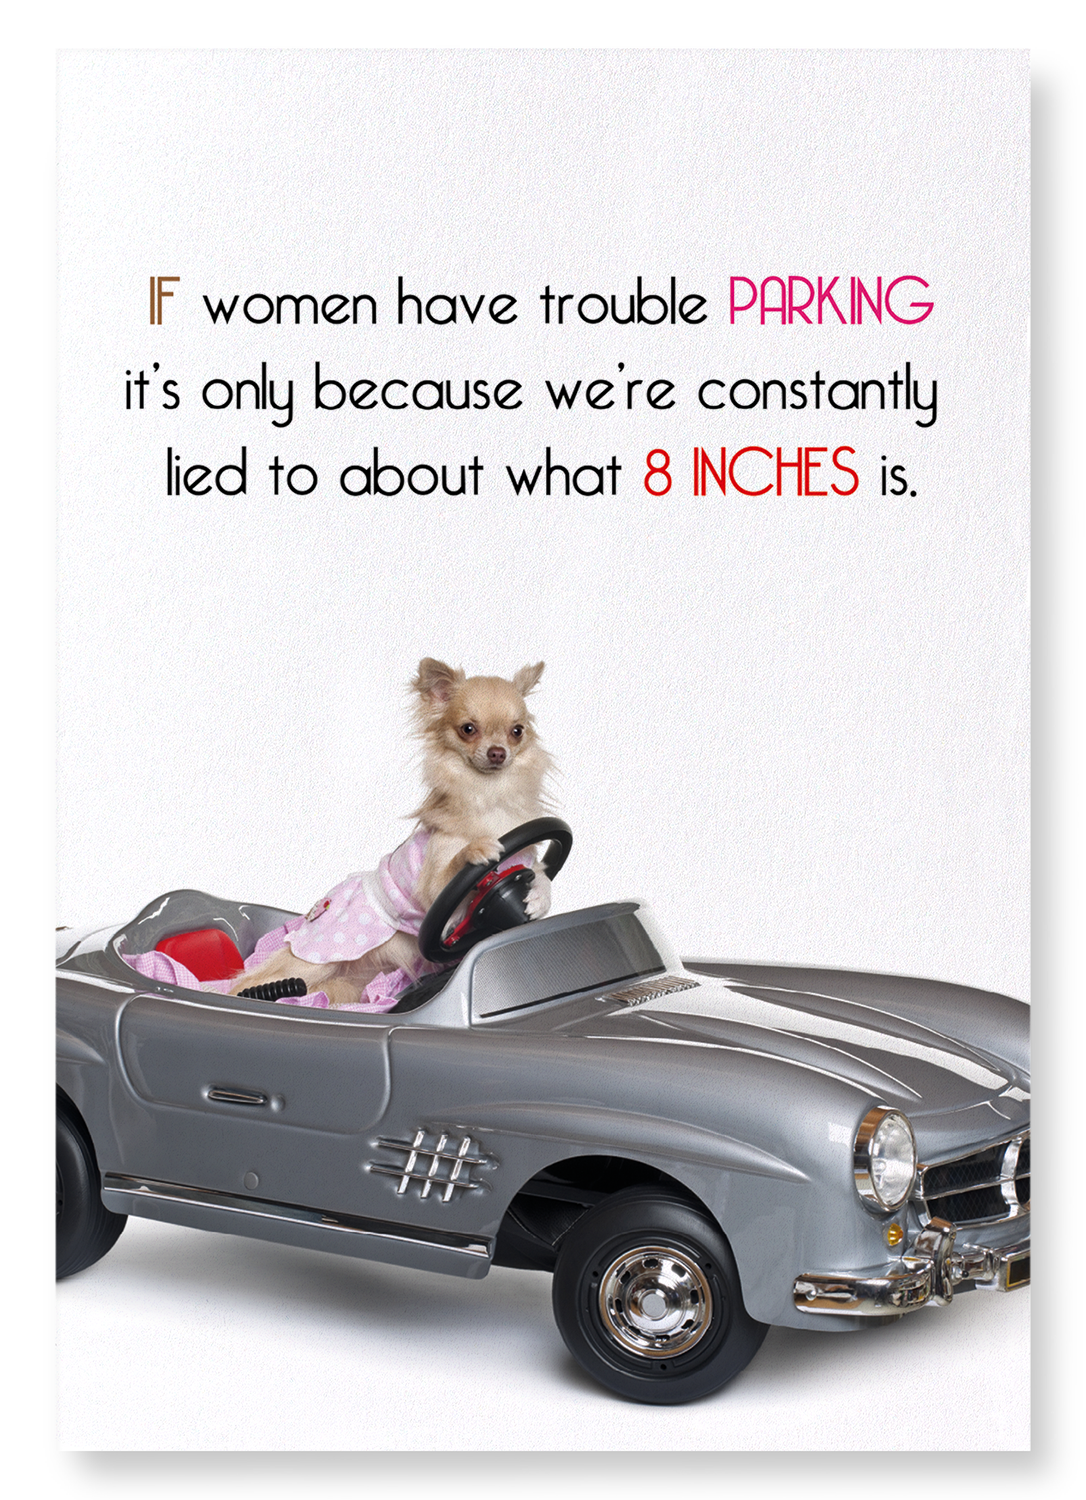 PARKING AND 8 INCHES: Funny Animal Art print